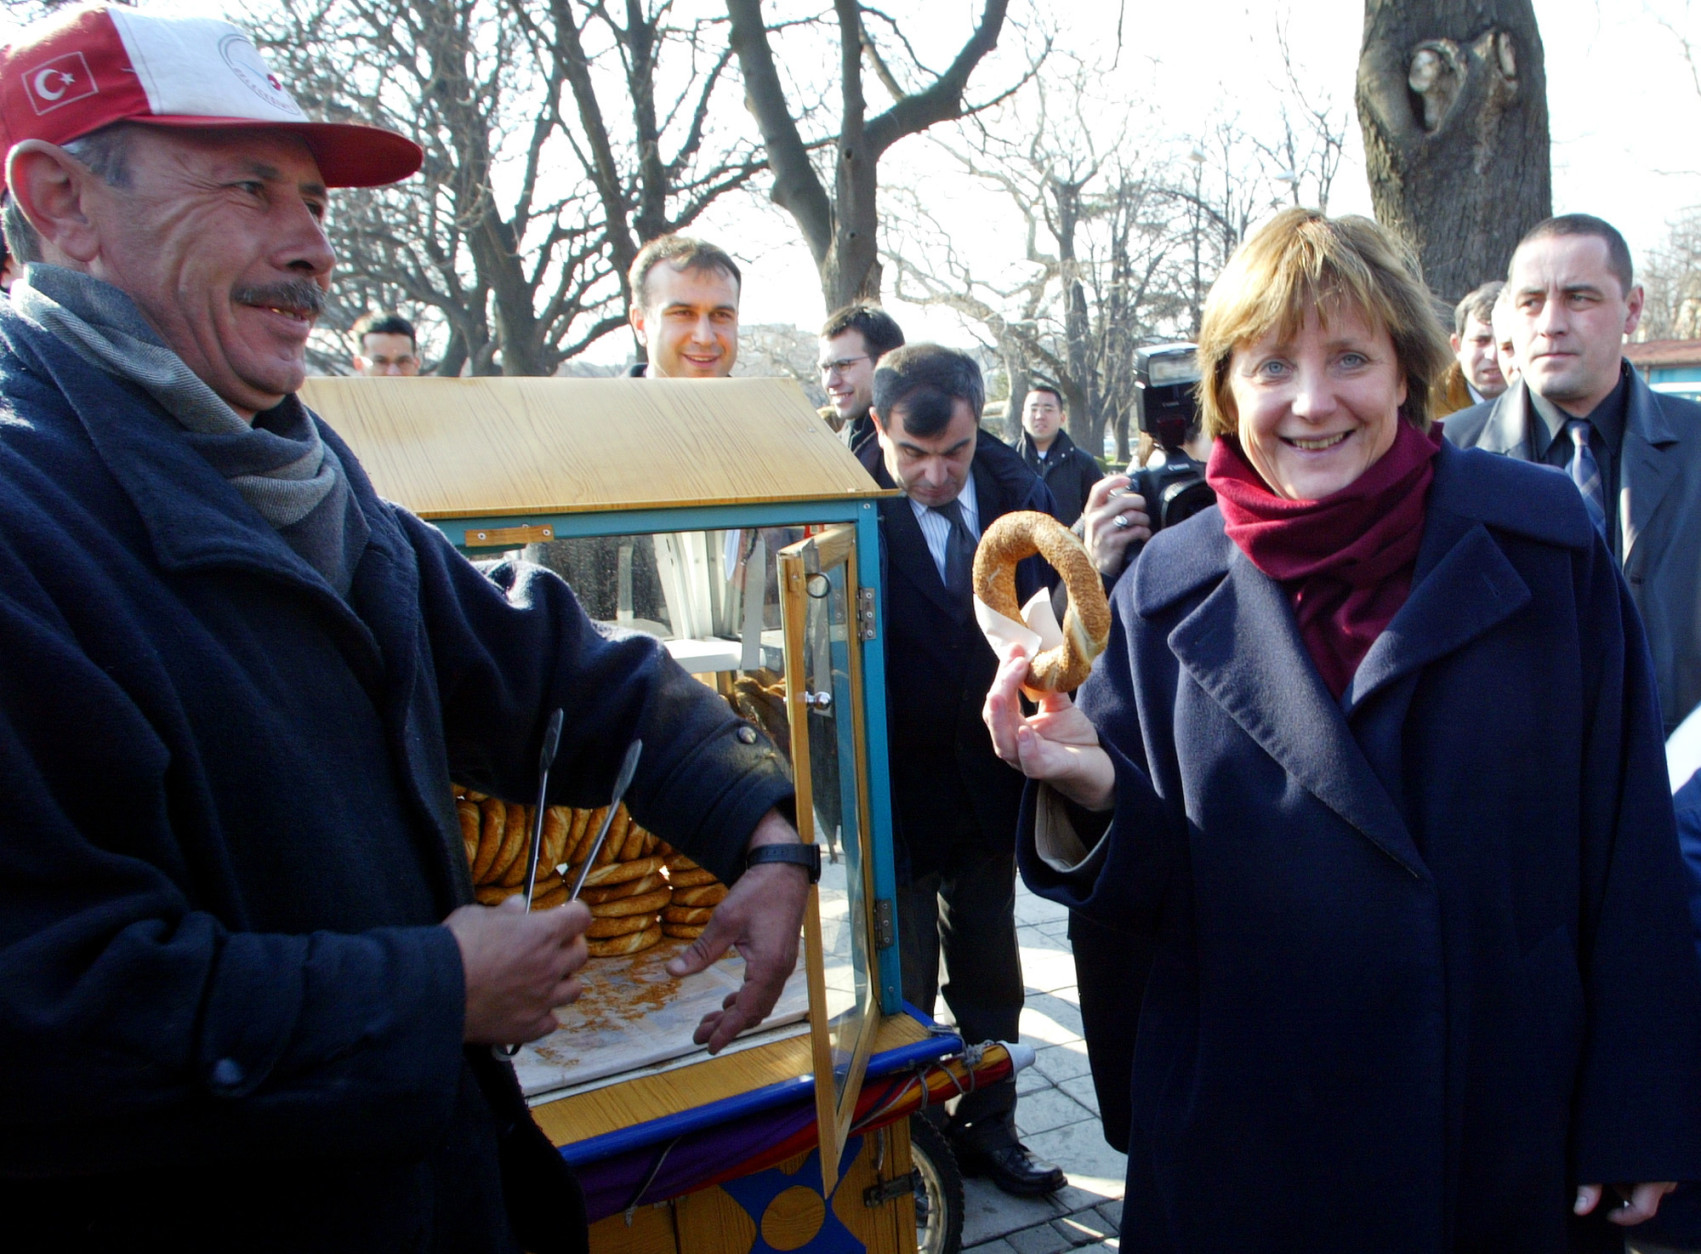 Angela Merkel, the leader of Germany's Christian Democrats, right, receives a simit, a traditional Turkish pretzel, from a street vendor as she tours Istanbul's old city, Turkey, Tuesday Feb. 17 , 2004. Angela Merkel is in Turkey for a two-day official visit. Merkel met with Turkish Prime Minister Recep Tayyip Erdogan and the other officials focusing on Turkey's European Union bid. (AP Photo/Osman Orsal)